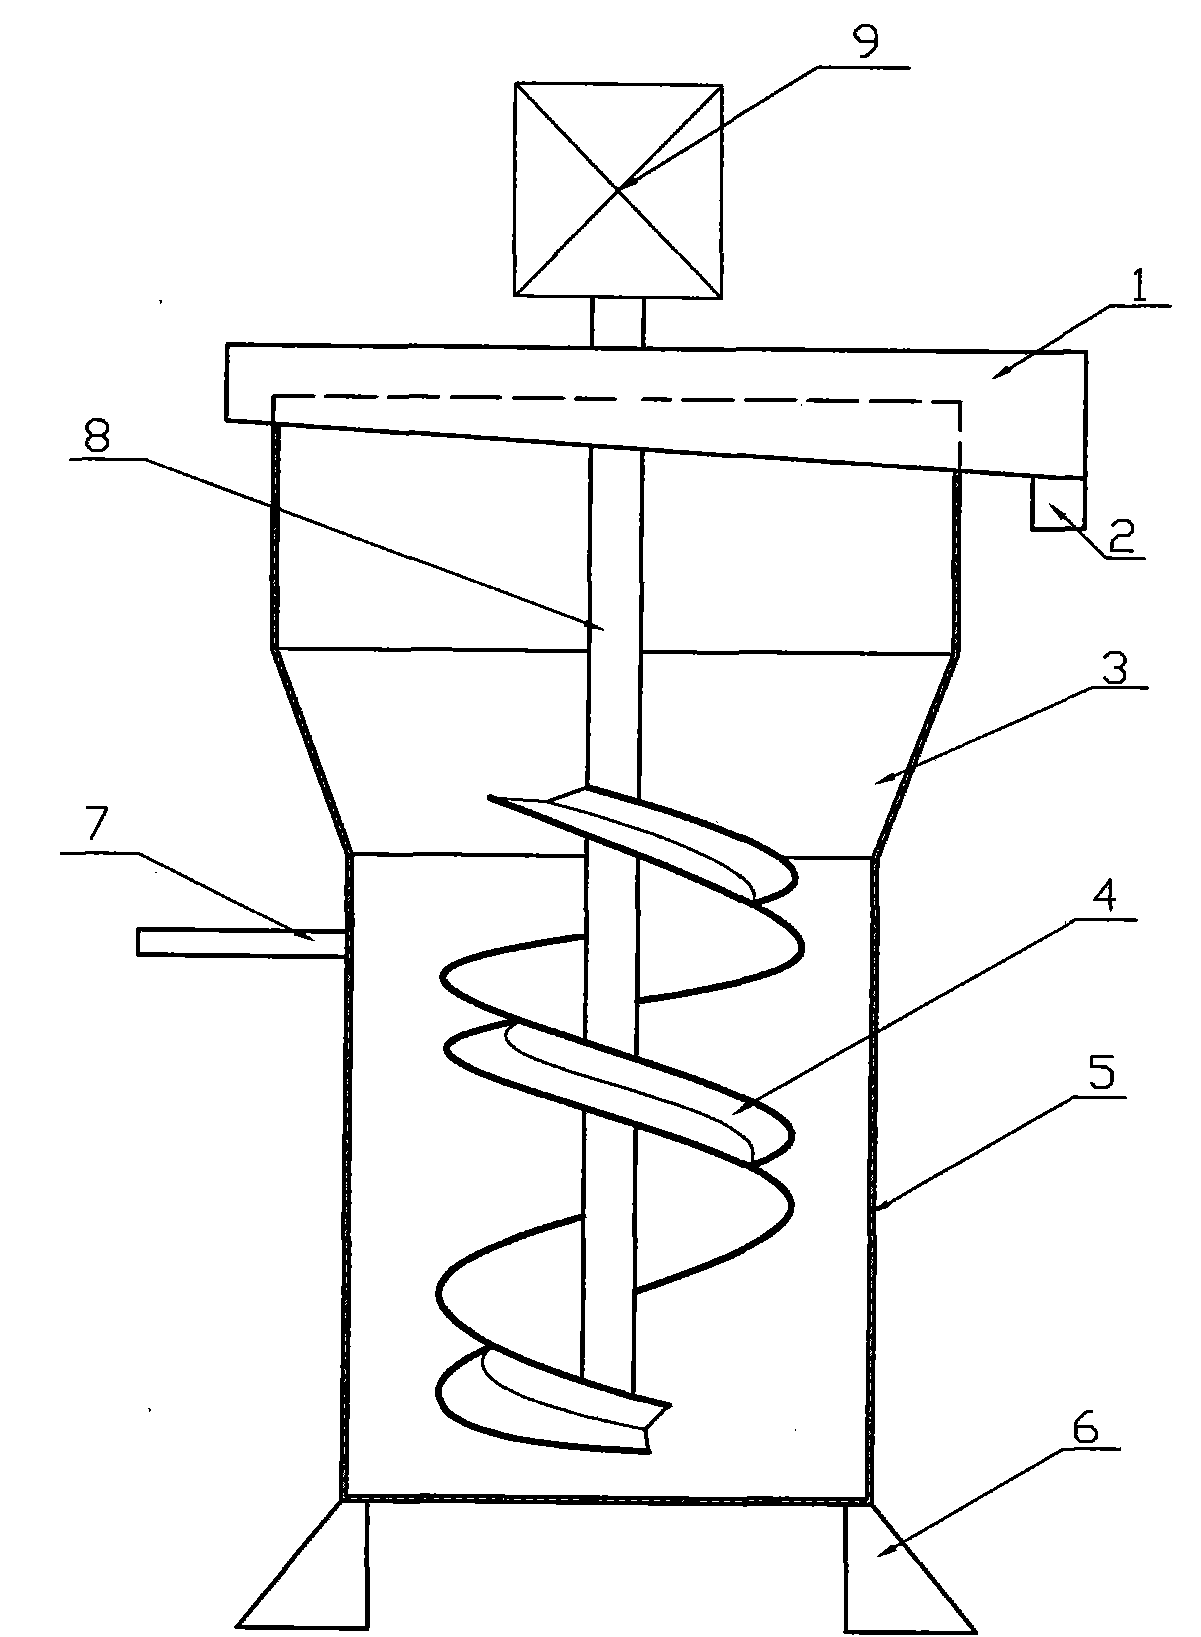 Preparation method of semiconductor wafer cutting blade material